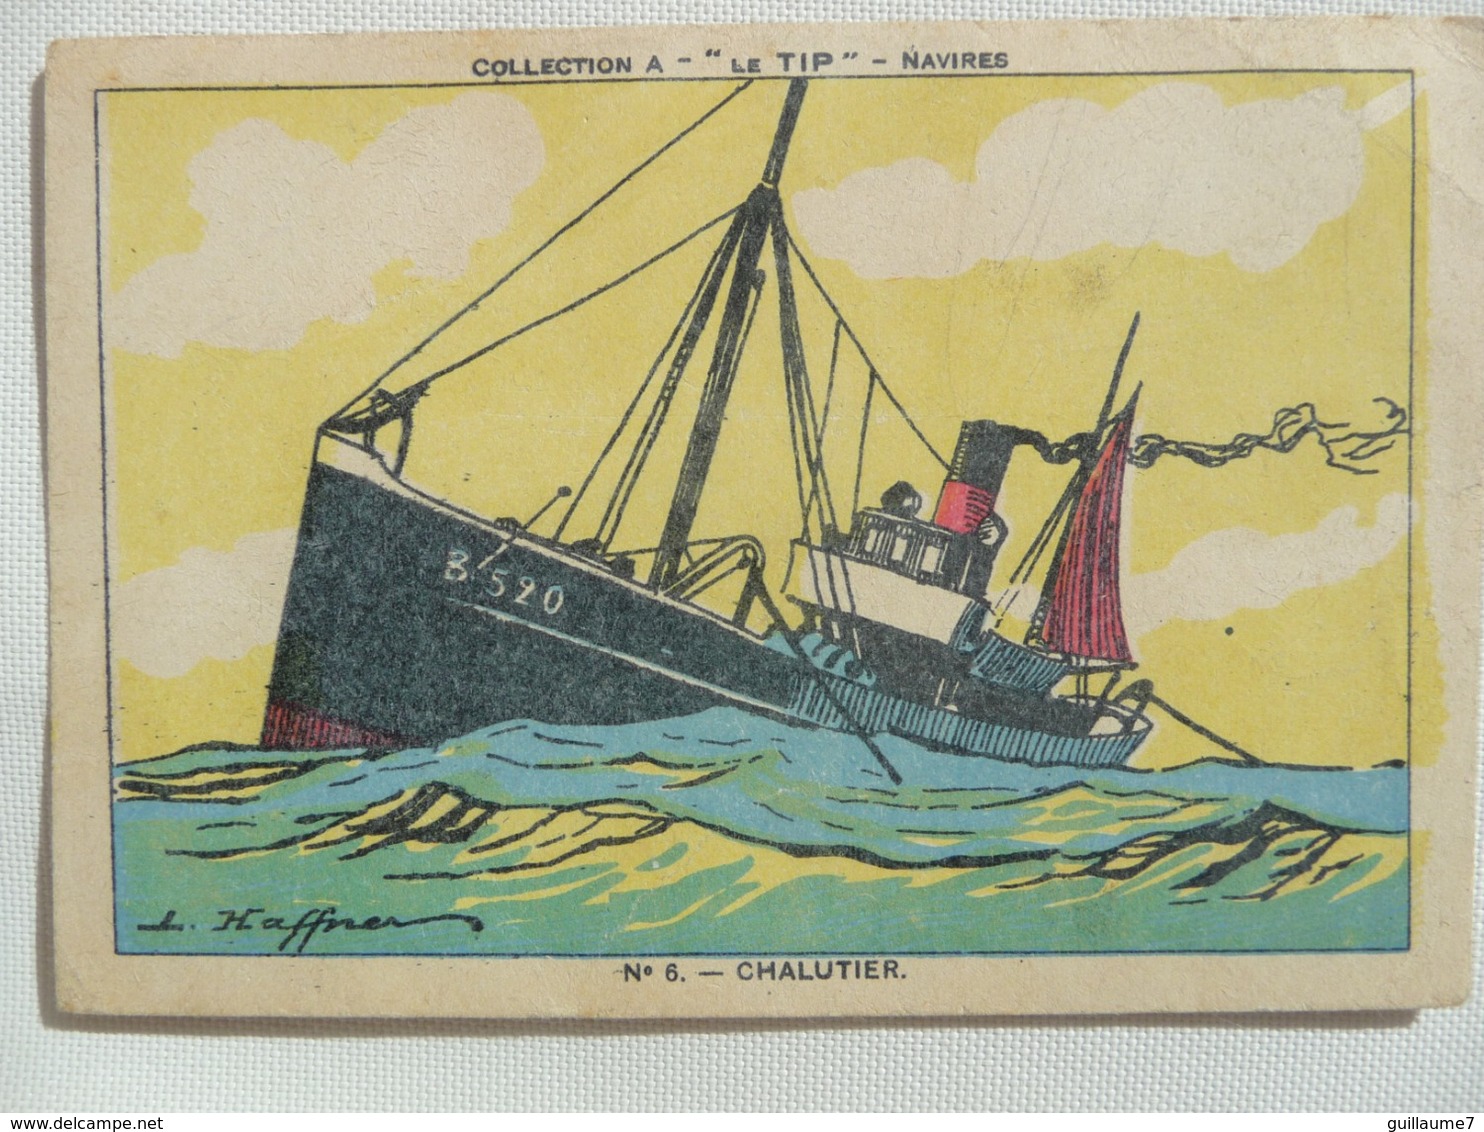 CPA -  Collection A "Le Tip" Navires - N° 6 Chalutier - Illustr. Haffner - Tip Remplace Le Beurre - Advertising